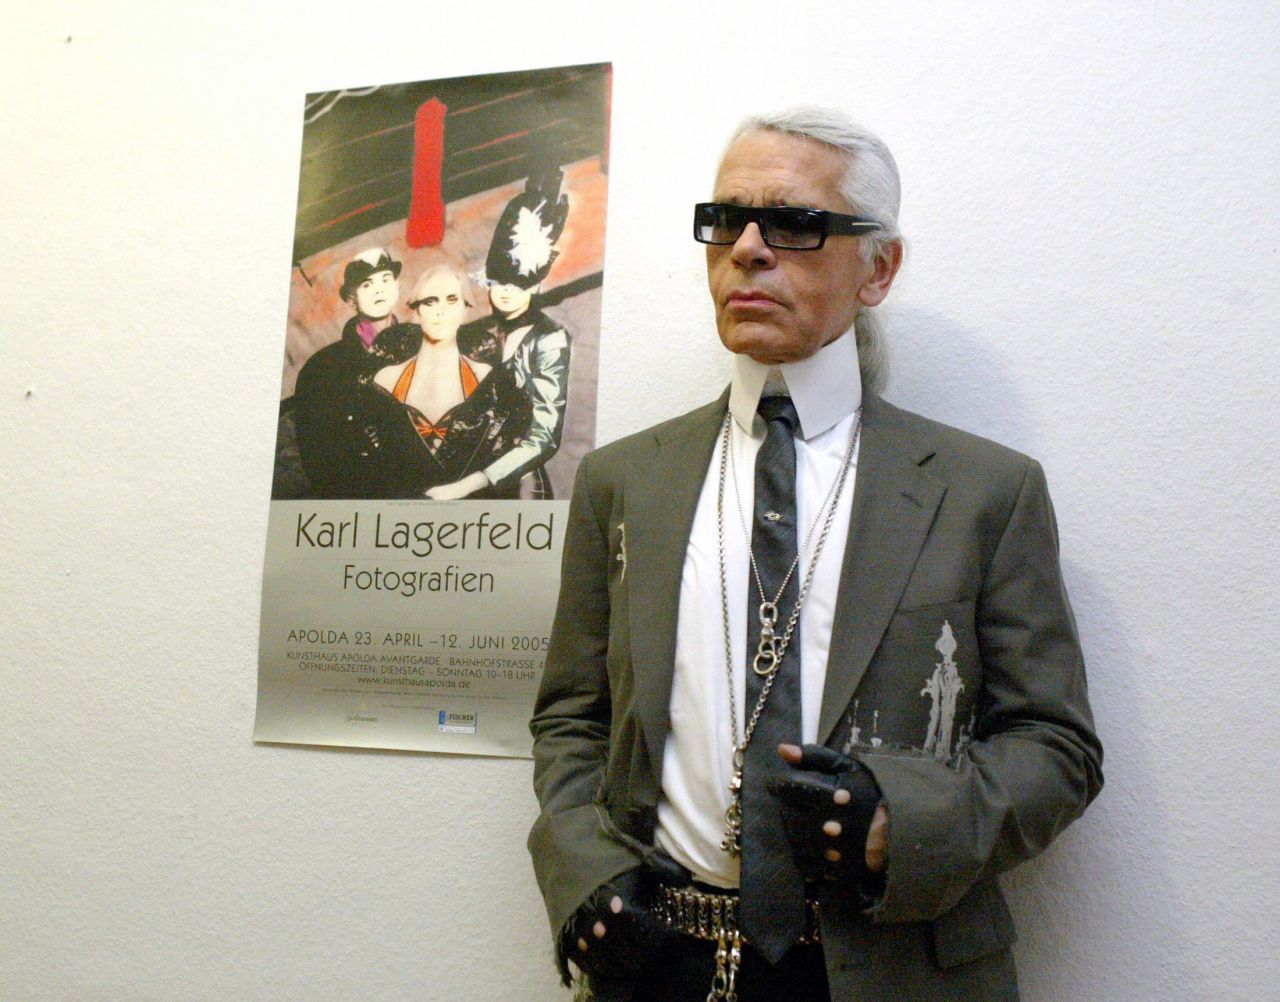 Lagerfeld at the opening of his exhibition "Karl Lagerfeld - Photografies" in Apolda, Germany.